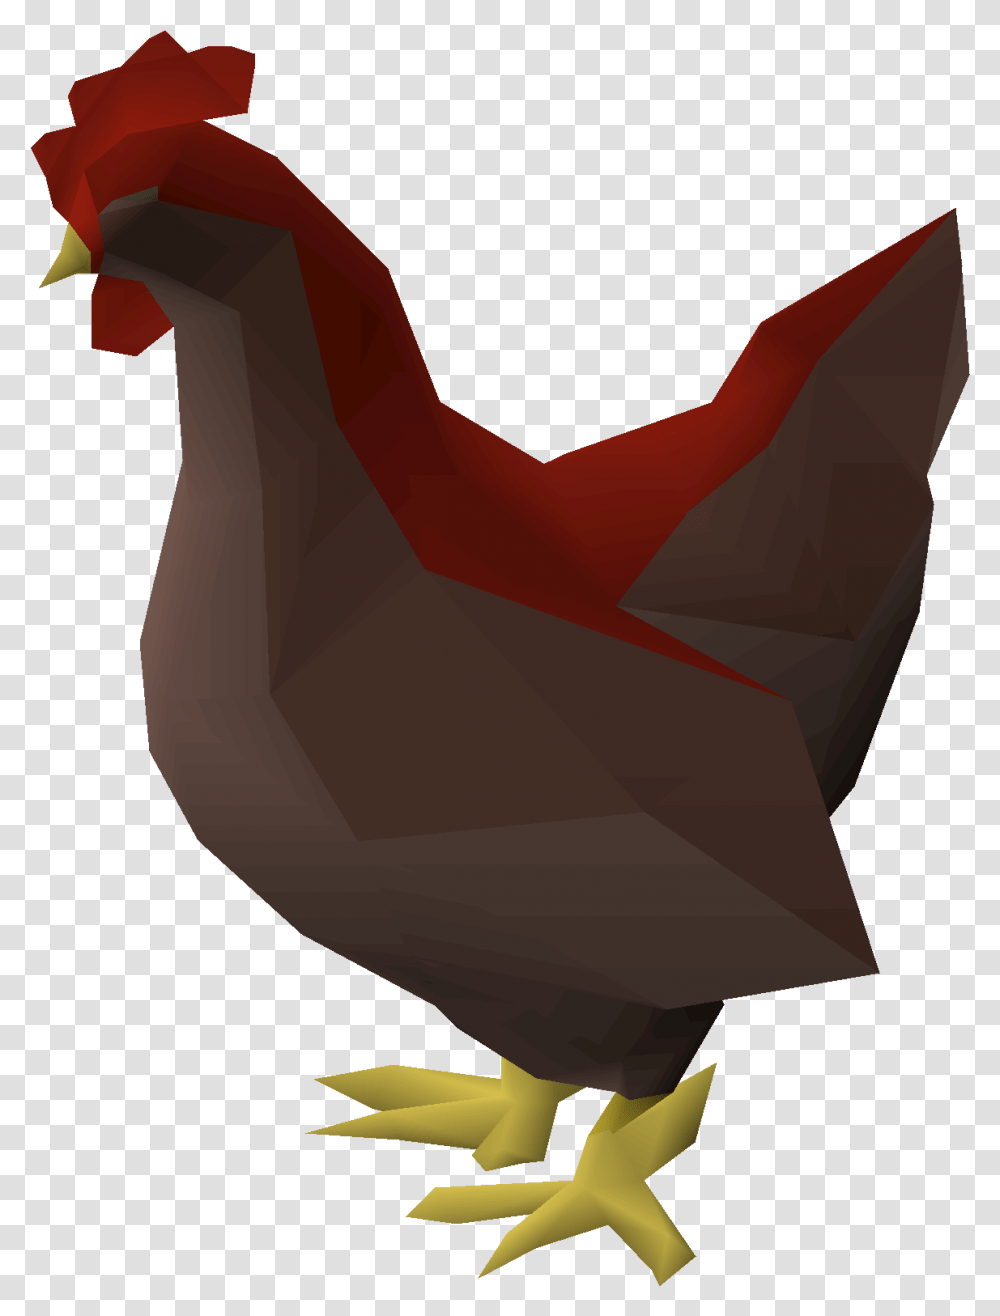 Oomlie Bird Osrs Wiki Fowl, Animal, Poultry, Hen, Chicken Transparent Png